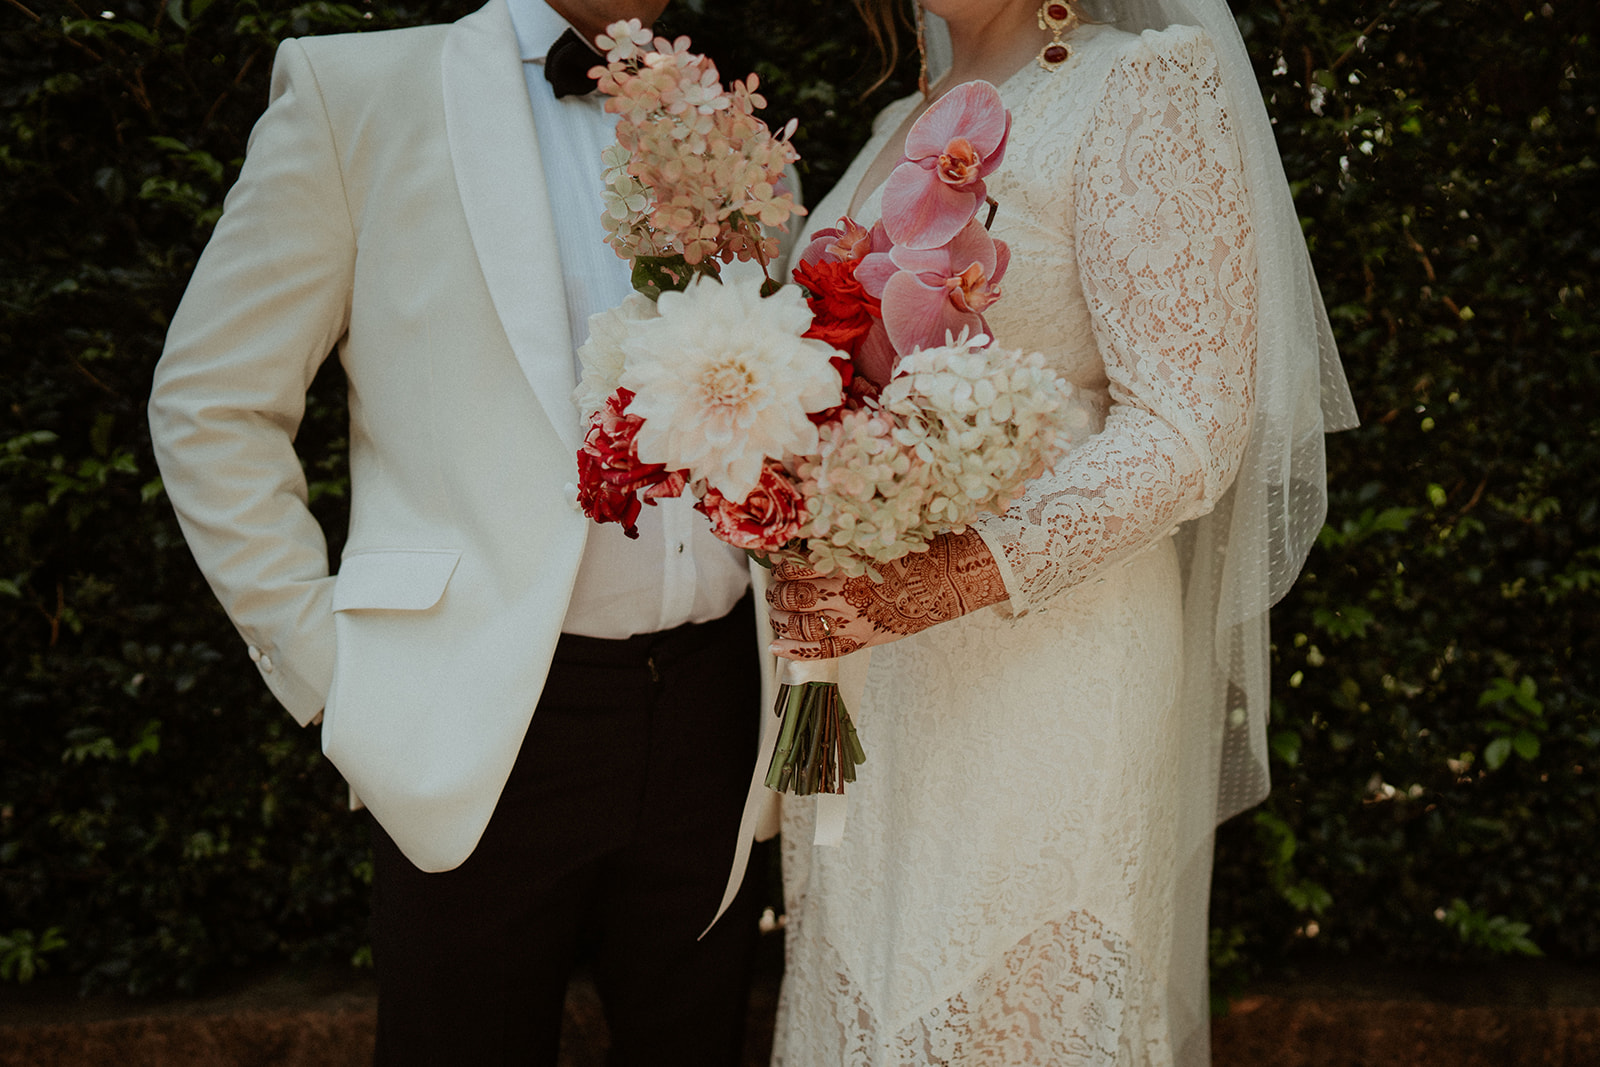 Bride and groom, standing together with a beautiful bouquet between them